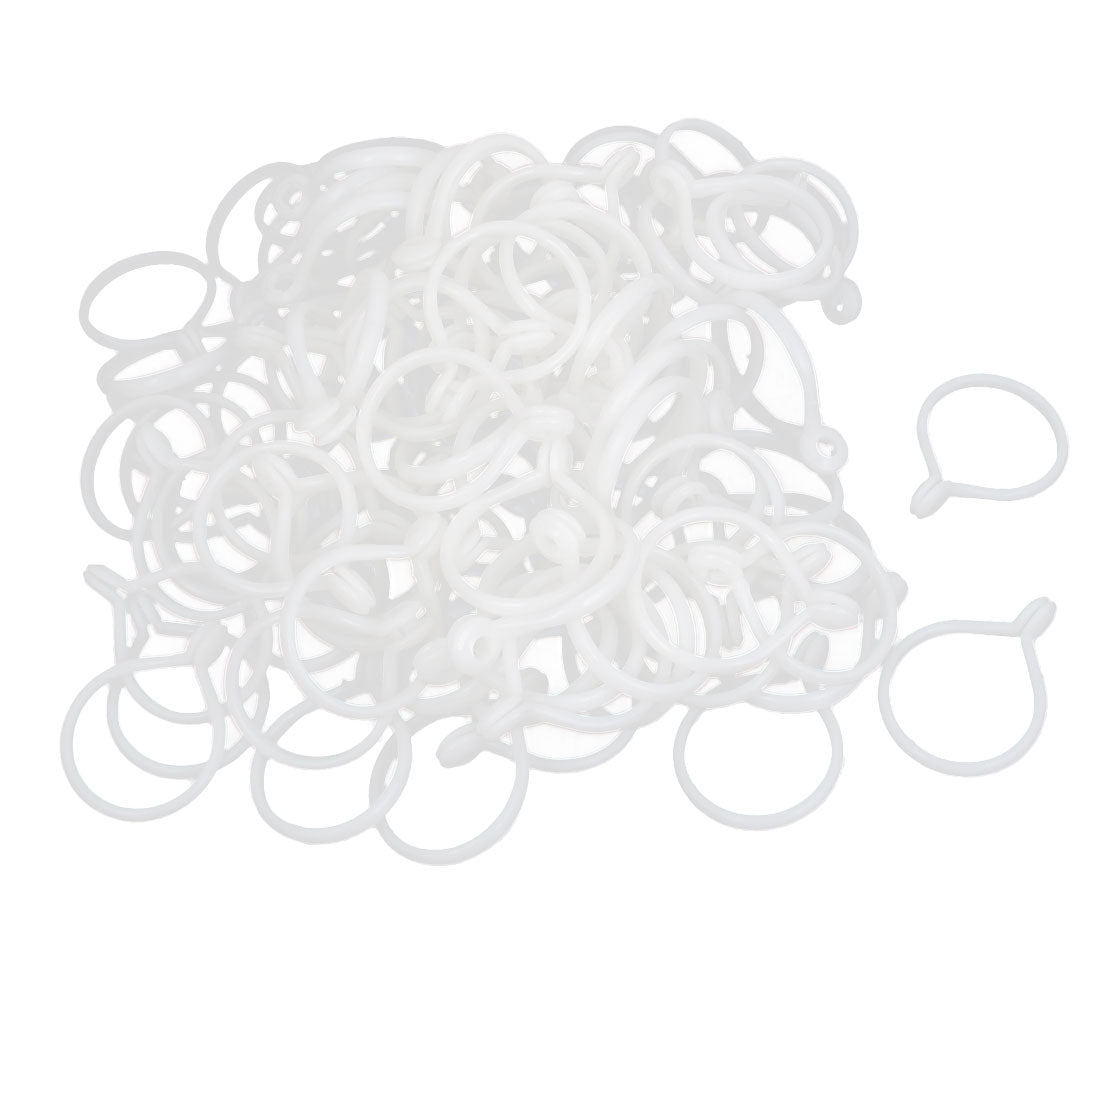 uxcell Uxcell Plastic Curtain Drapery Eyelet Rings 40mm Outer Diameter White 100pcs